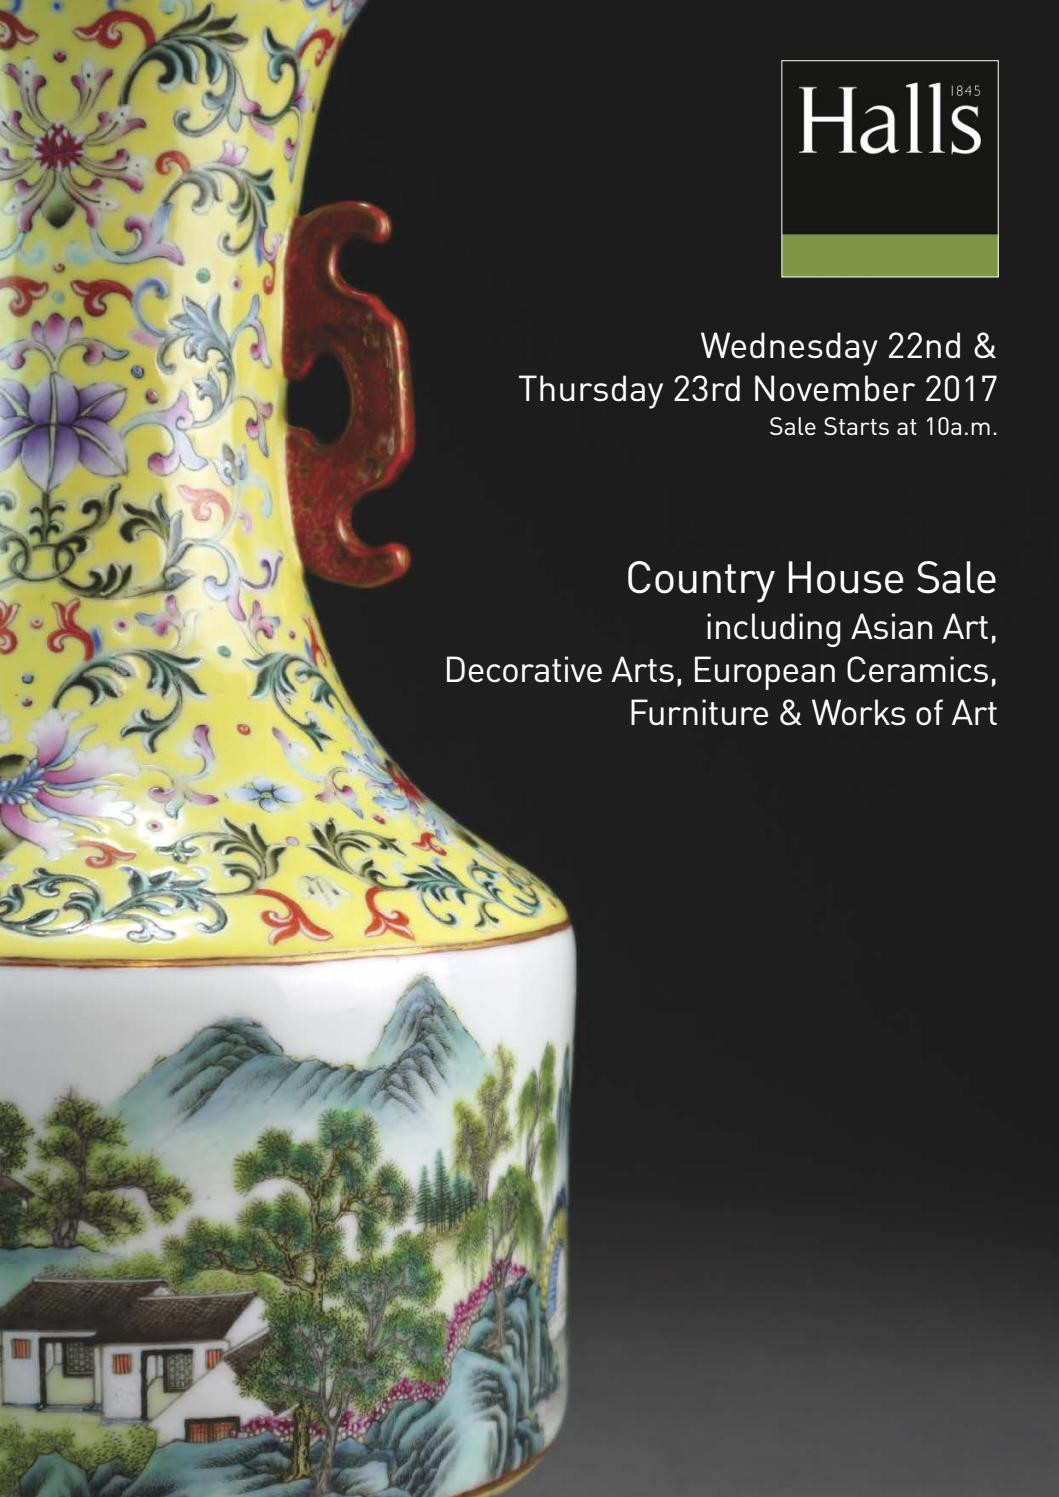 26 Awesome Ming Dynasty Vase for Sale 2024 free download ming dynasty vase for sale of halls auctioneers by jamm design ltd issuu regarding page 1